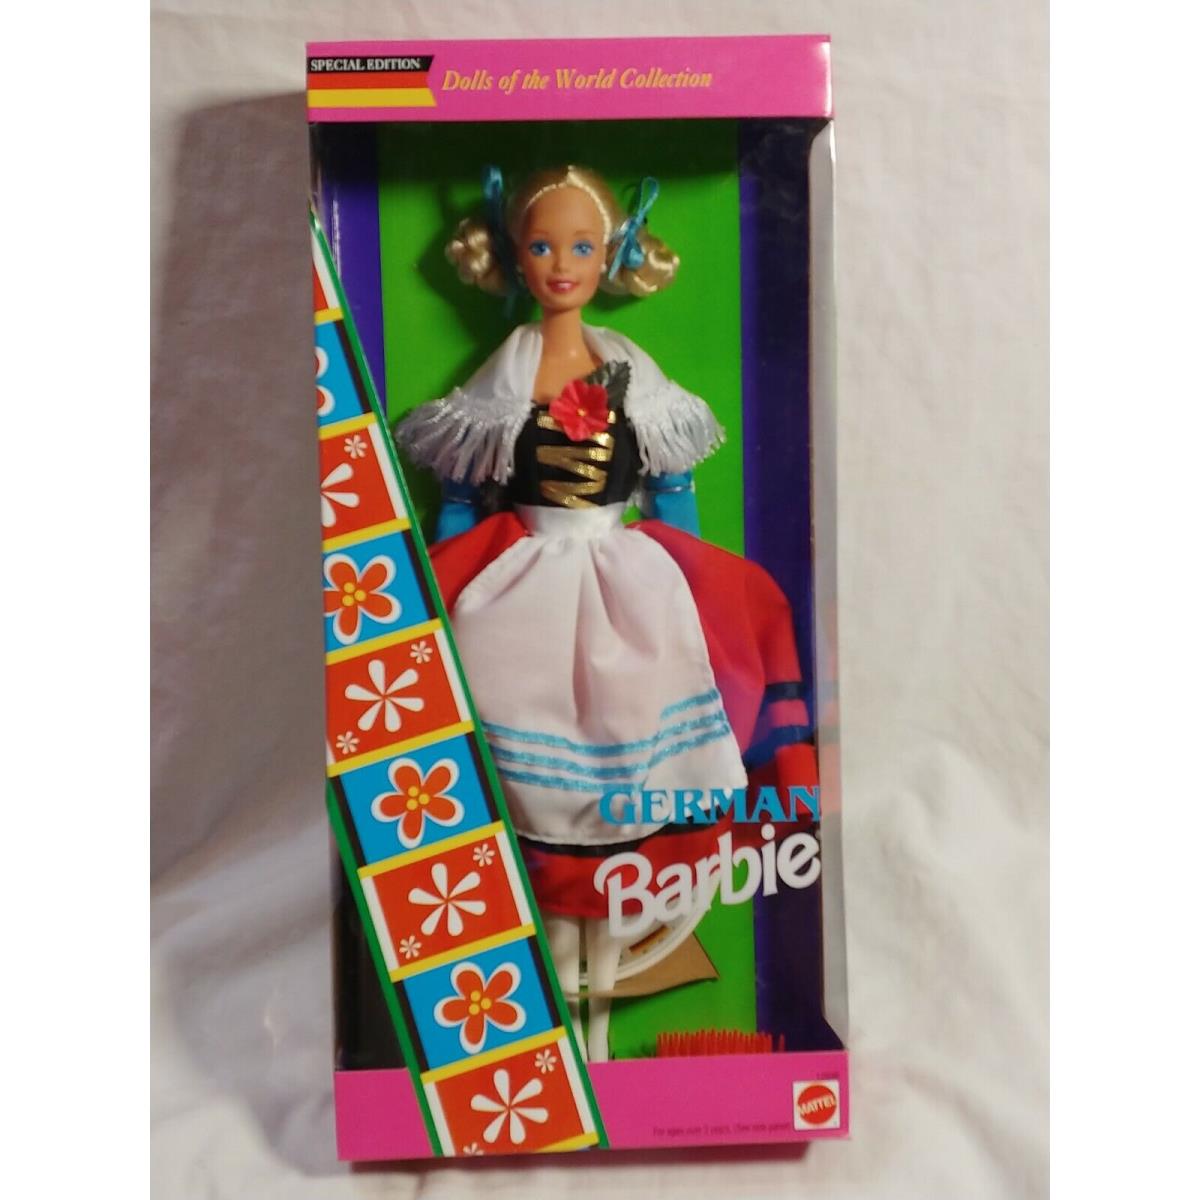 Vintage Mattel German Barbie Dolls Of The World Collection Special Edition 1994